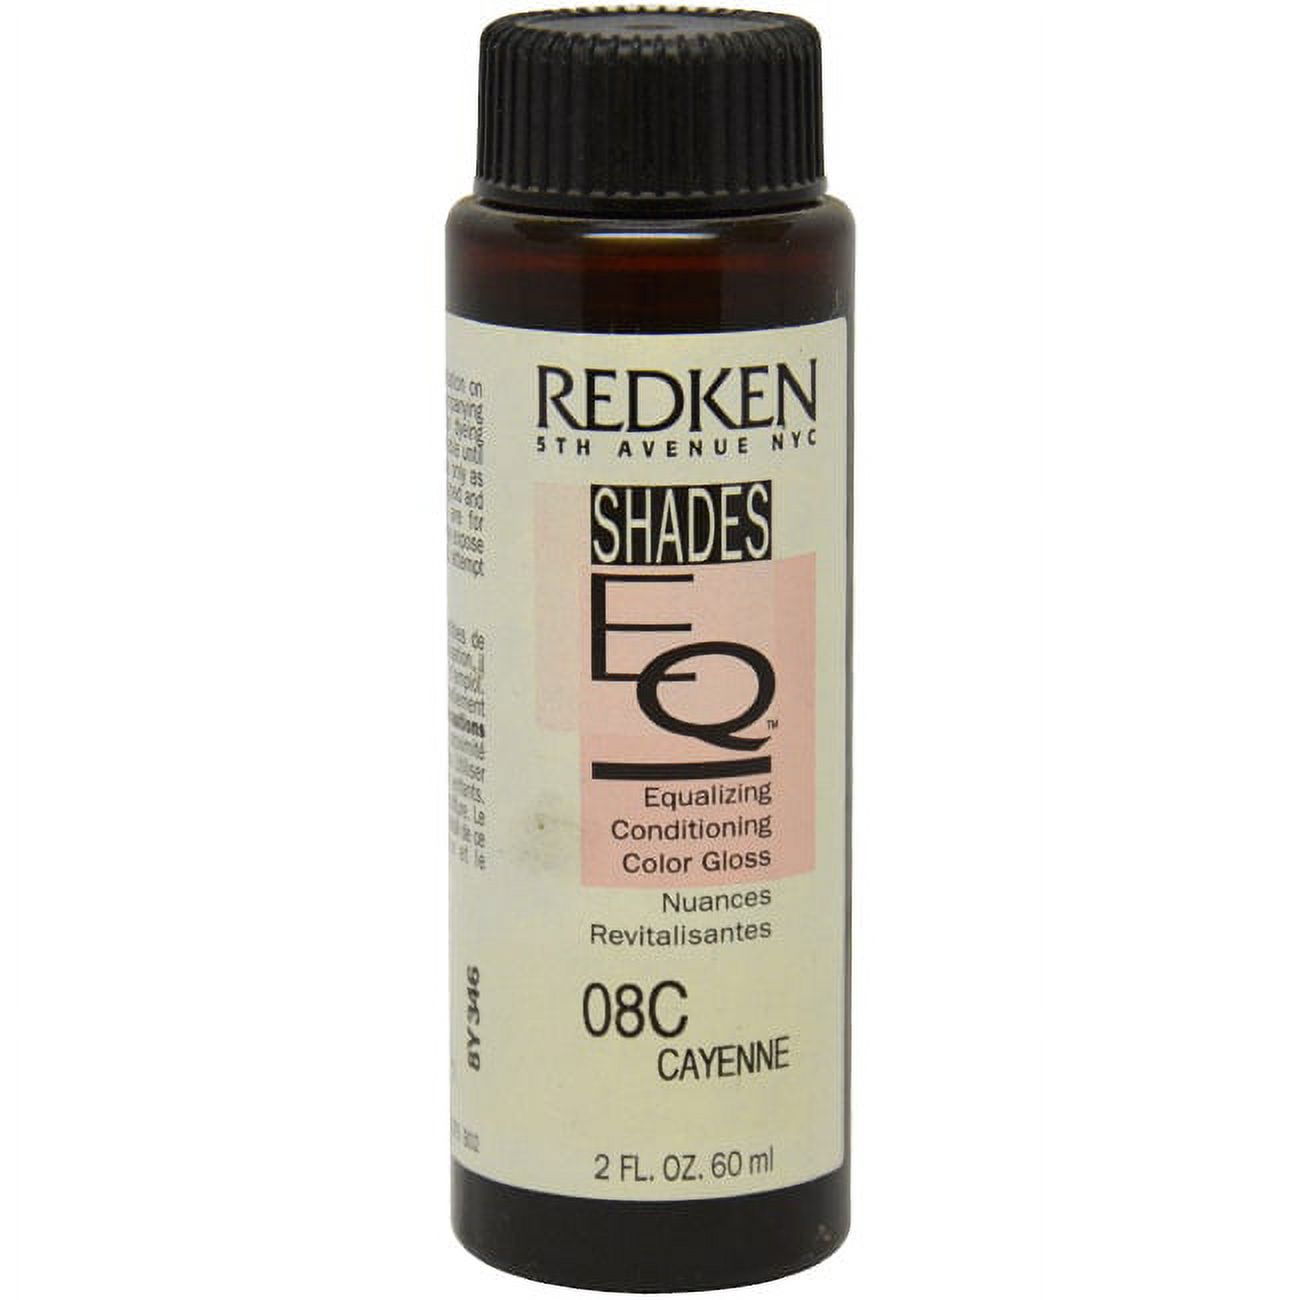 Redken Shades Eq Hair Color Gloss 08C, Cayenne, 2 Oz - image 2 of 2